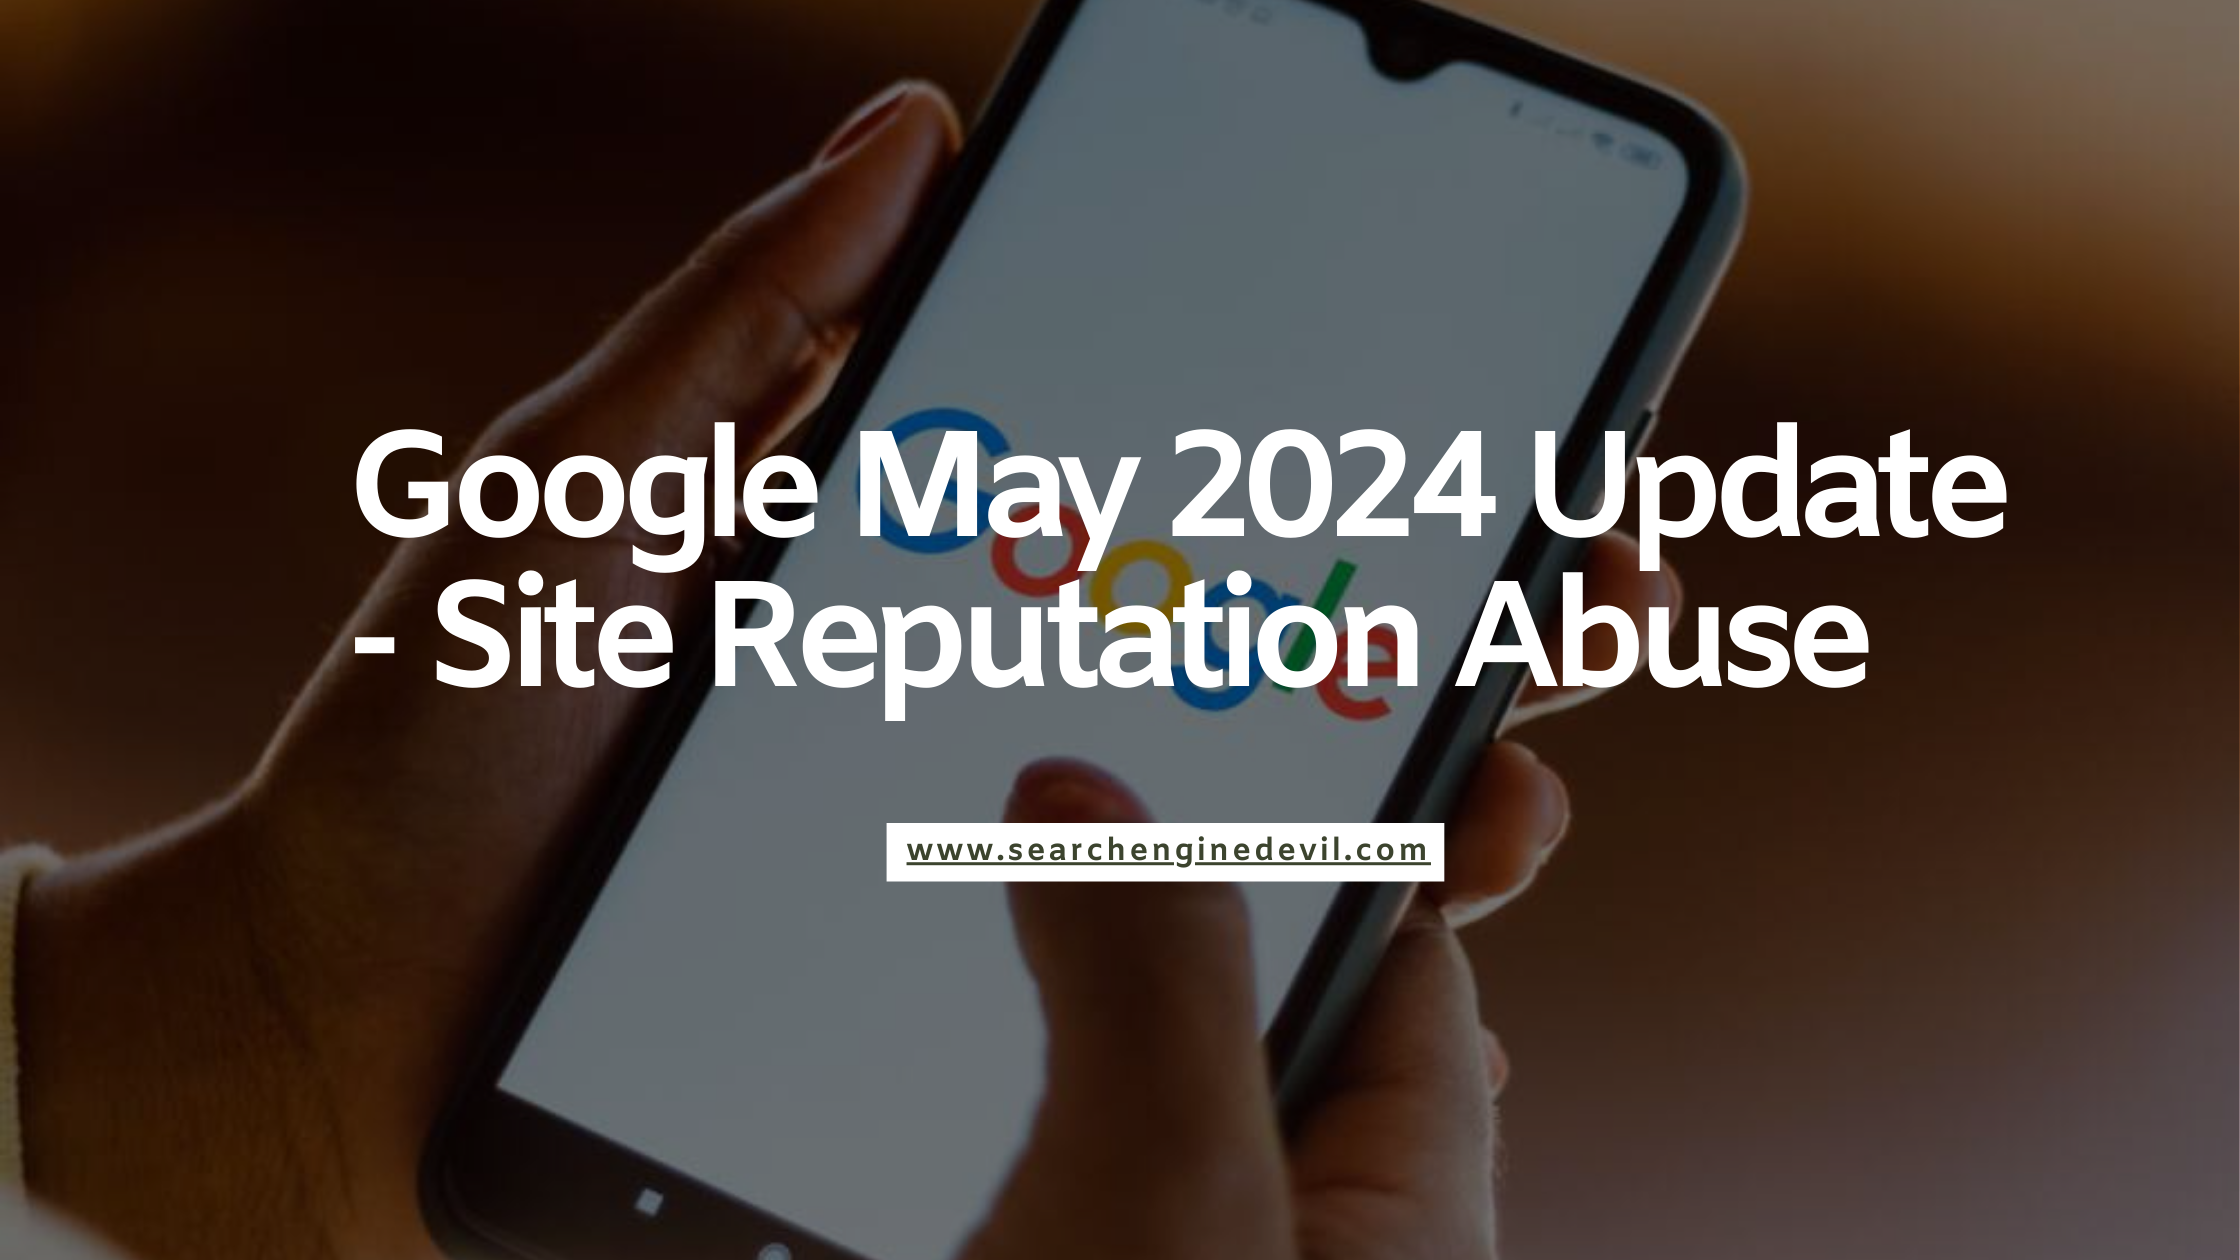 Google May 2024 Update - Site Reputation Abuse